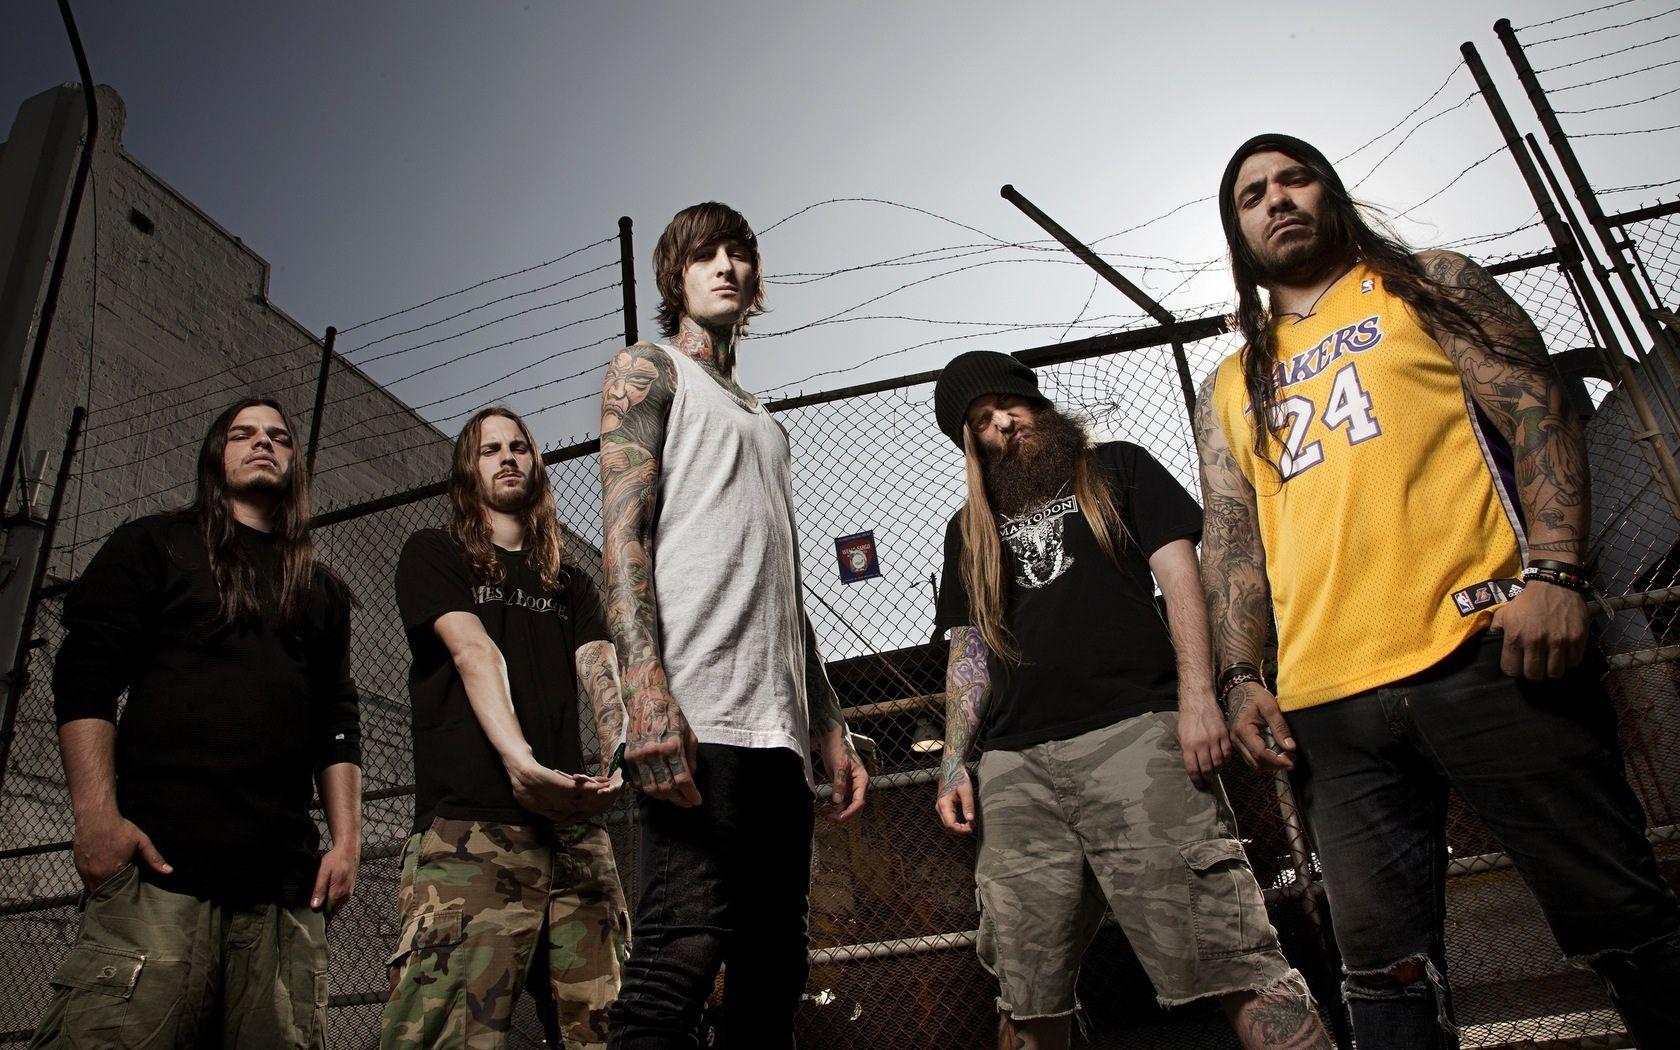 Suicide Silence Wallpaper Pack 854: Suicide Silence Wallpaper, 38